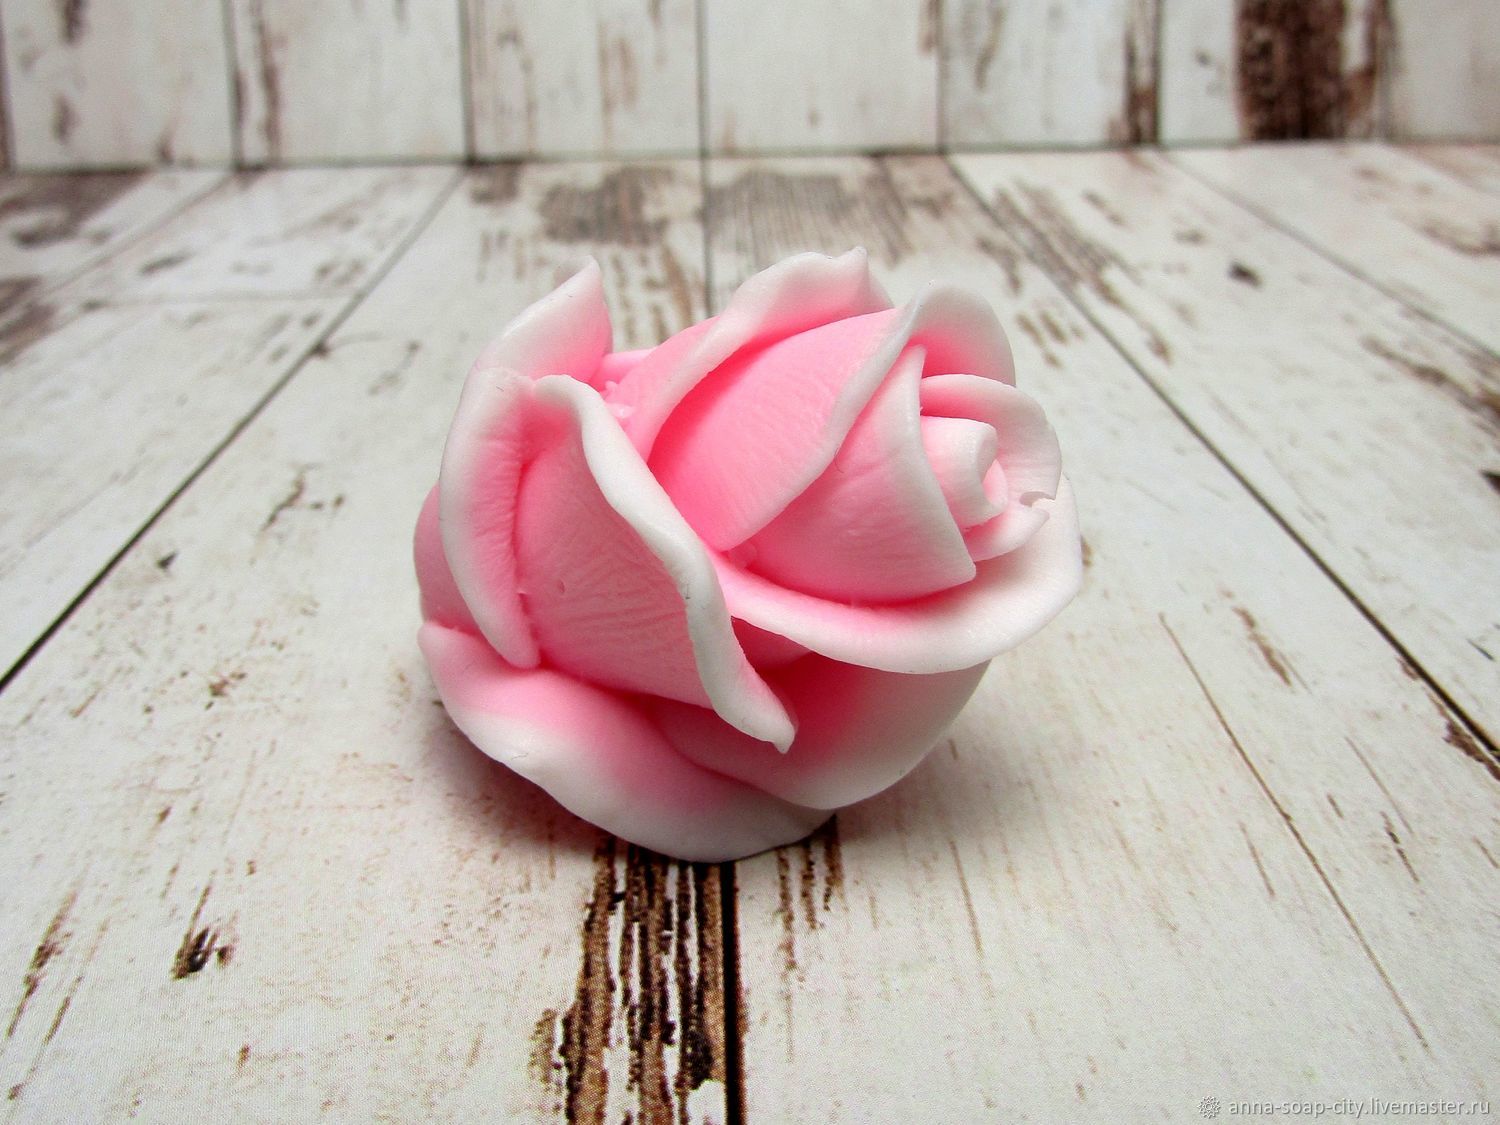 Silicone mold for soap and candles ' Rosebud №3', Form, Arkhangelsk,  Фото №1